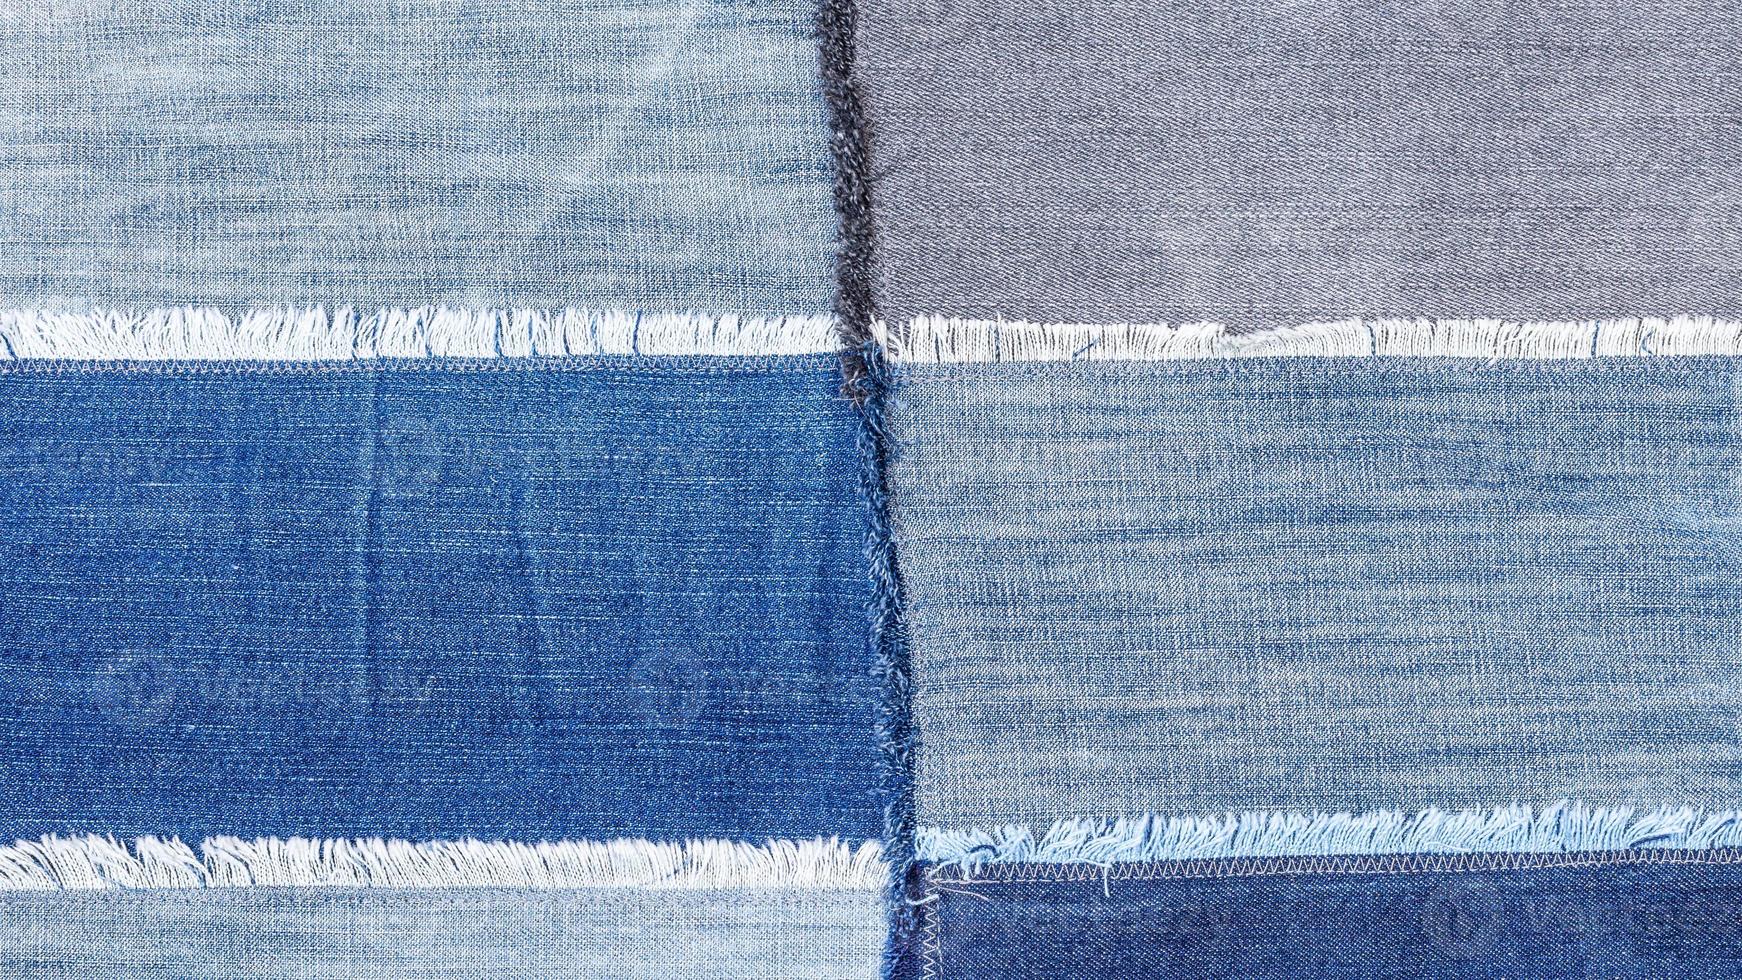 patchwork from various denim flaps close up photo